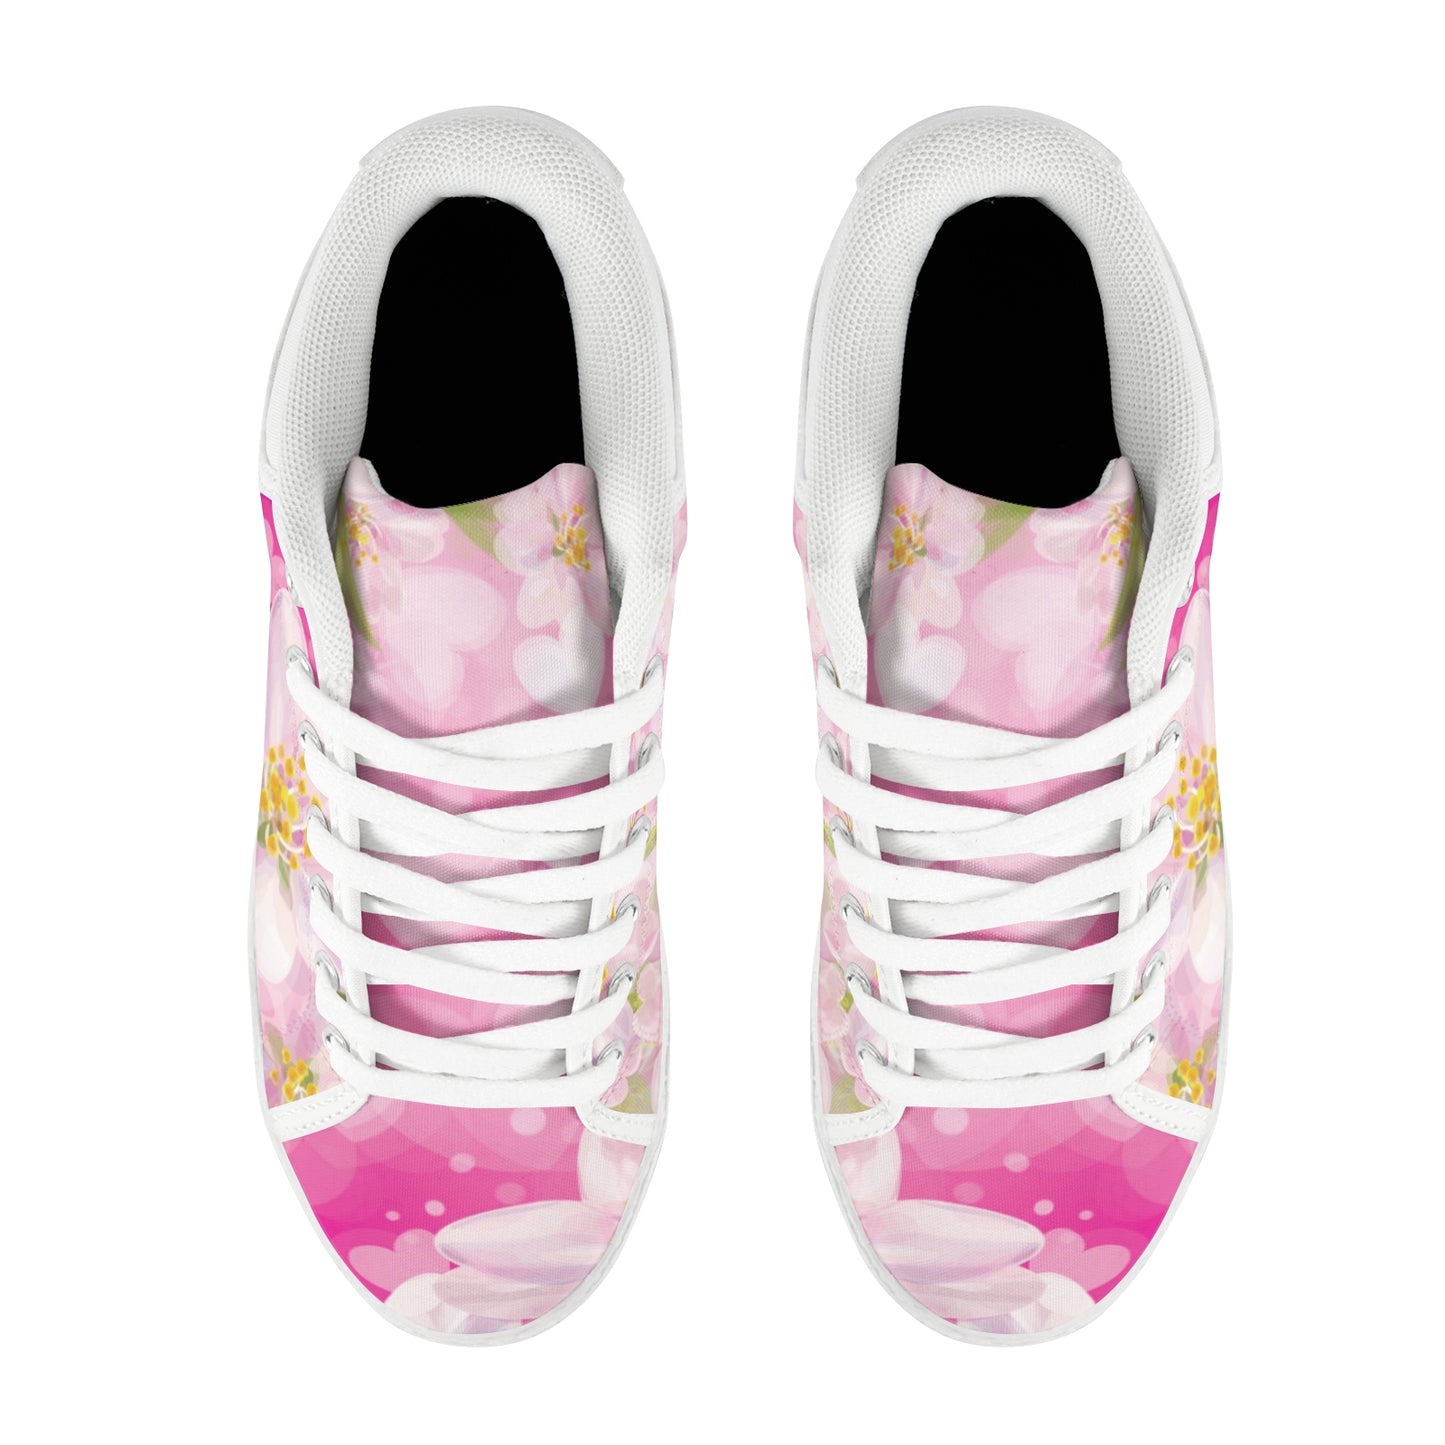 Chukka Canvas Women's Shoes - Pink Floral